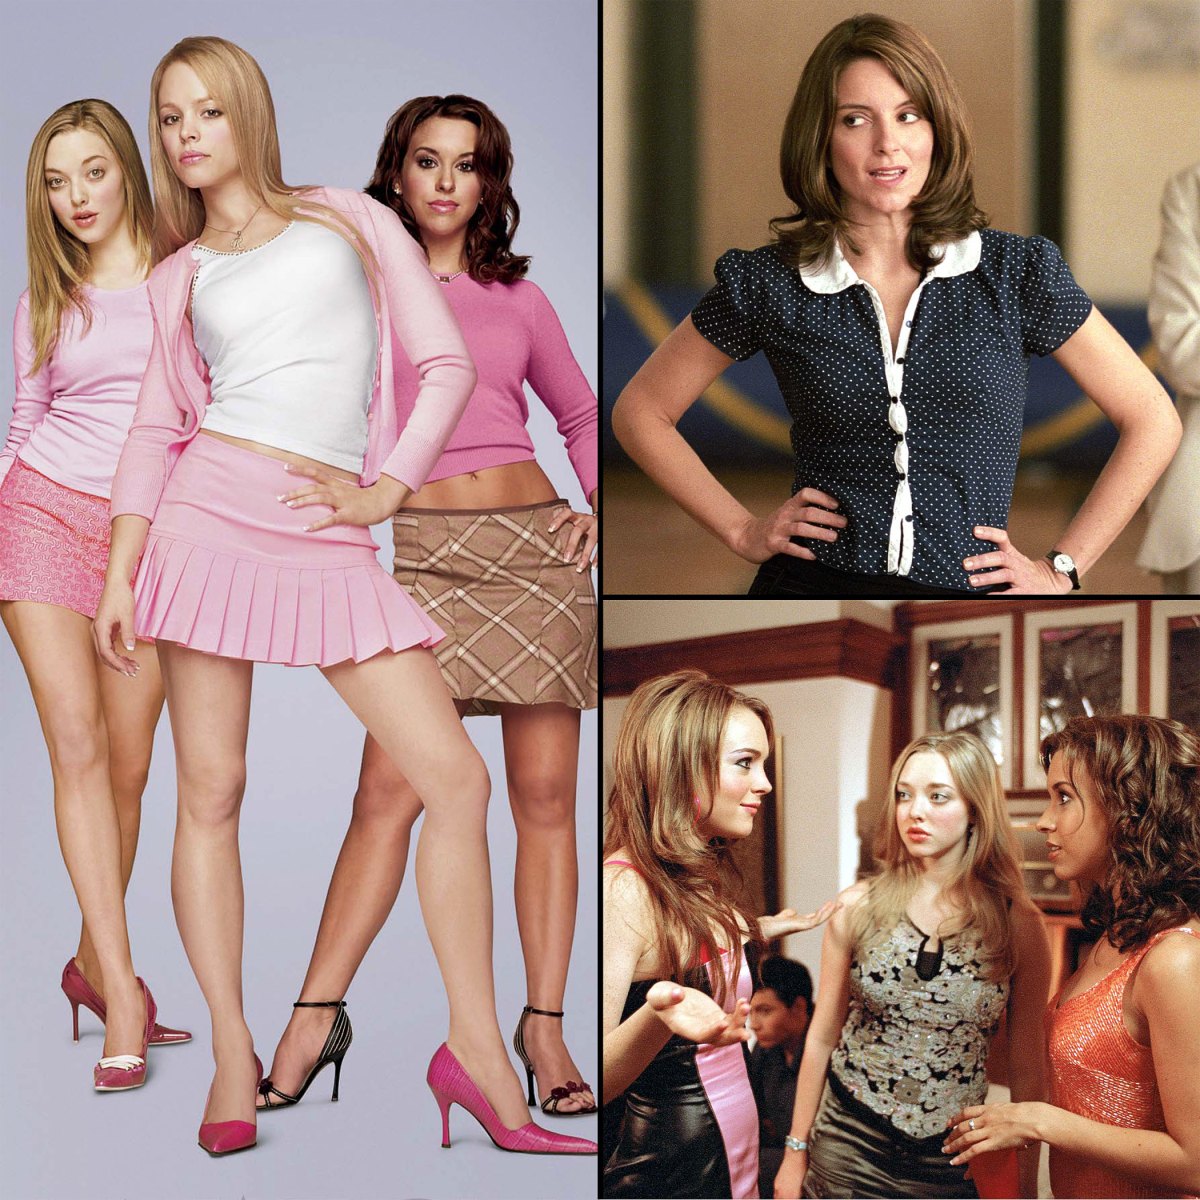 Photos from What We Know About the Mean Girls Movie Musical